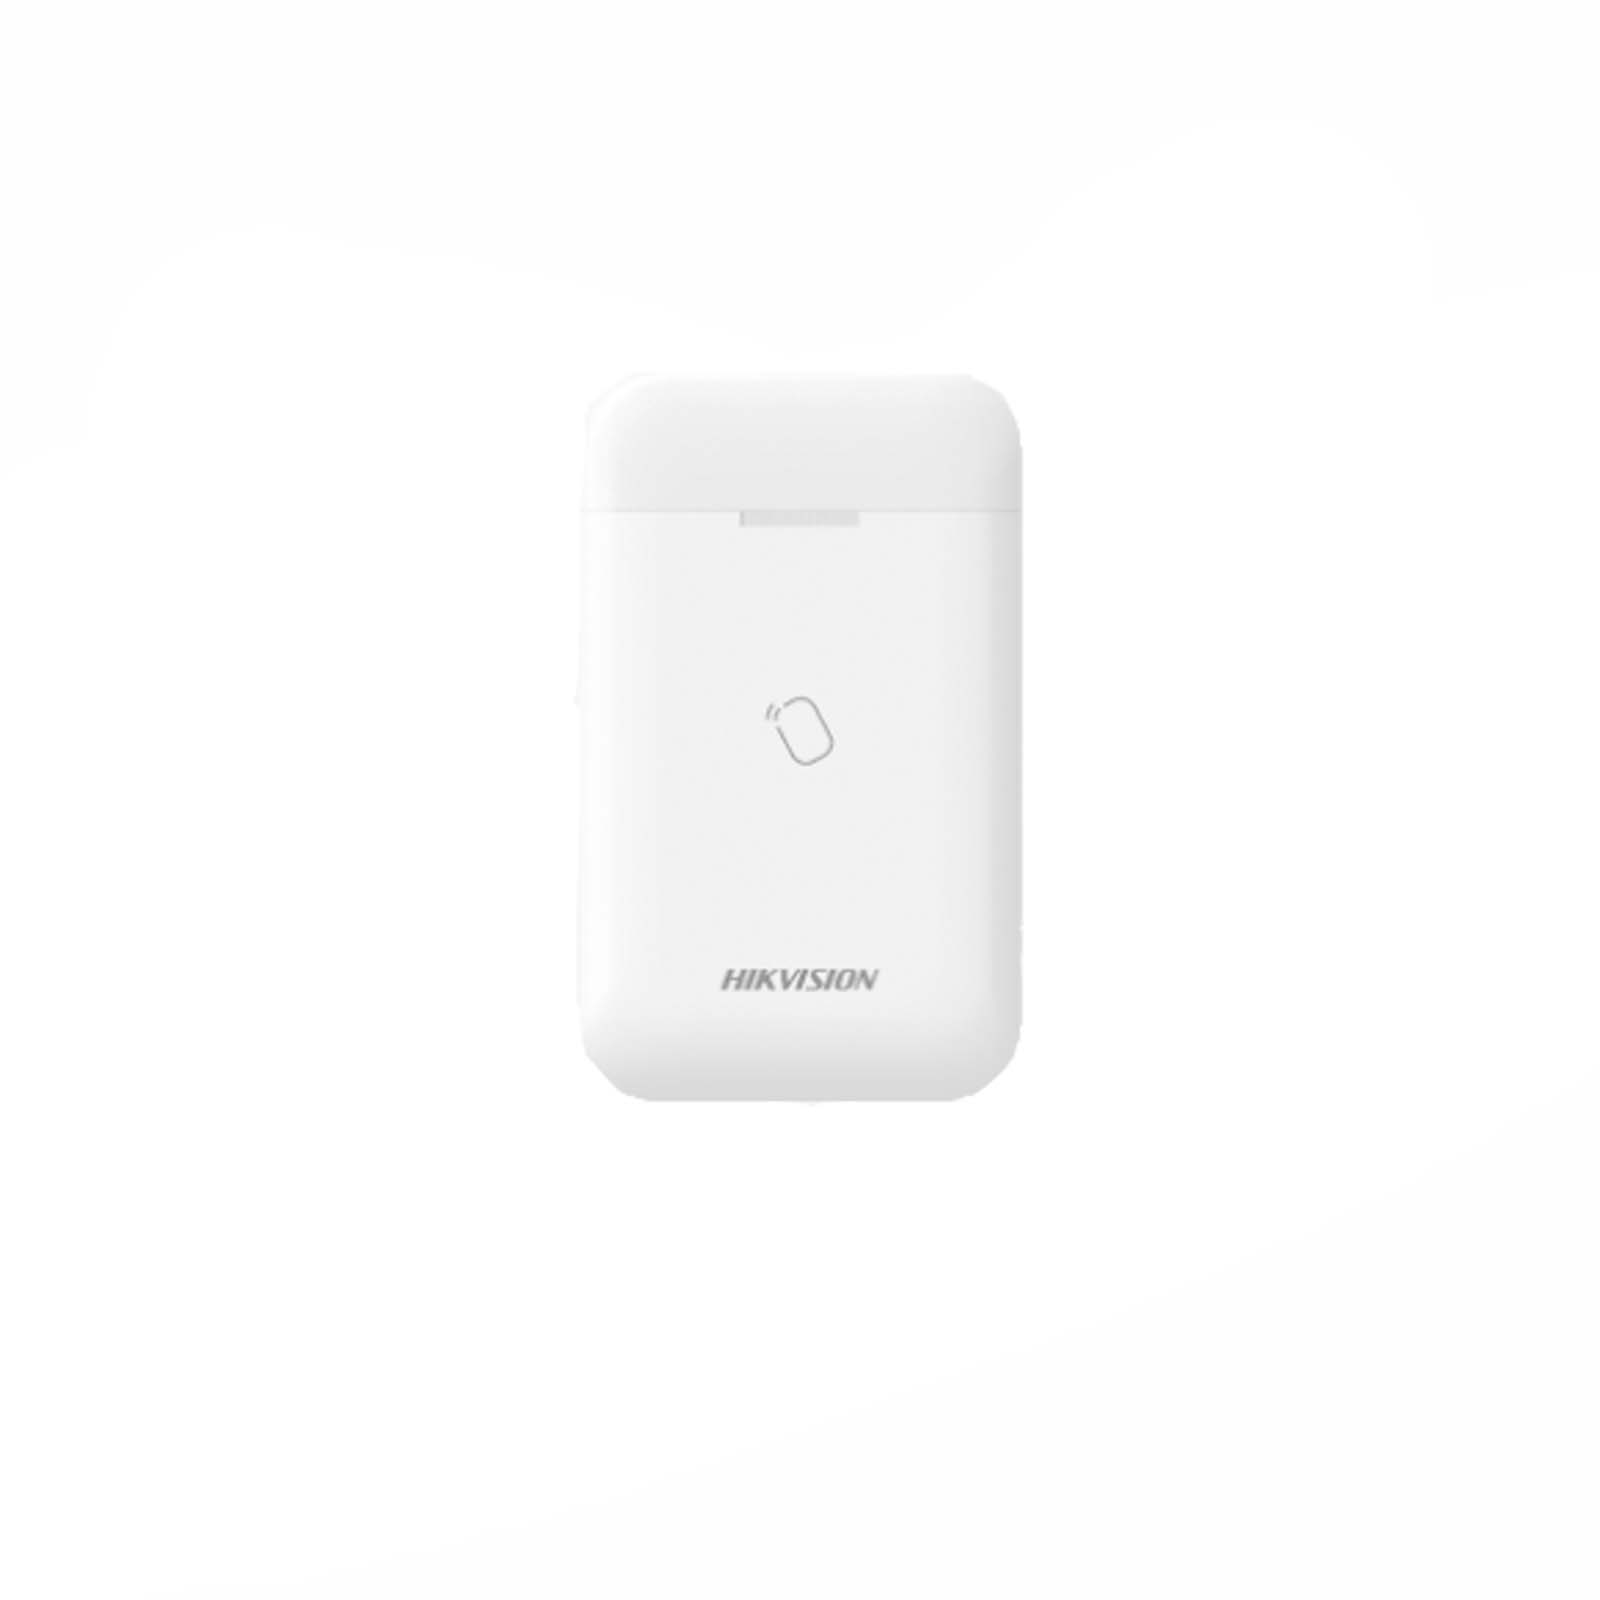 Lettore Wireless tag reader - axiom hikvision